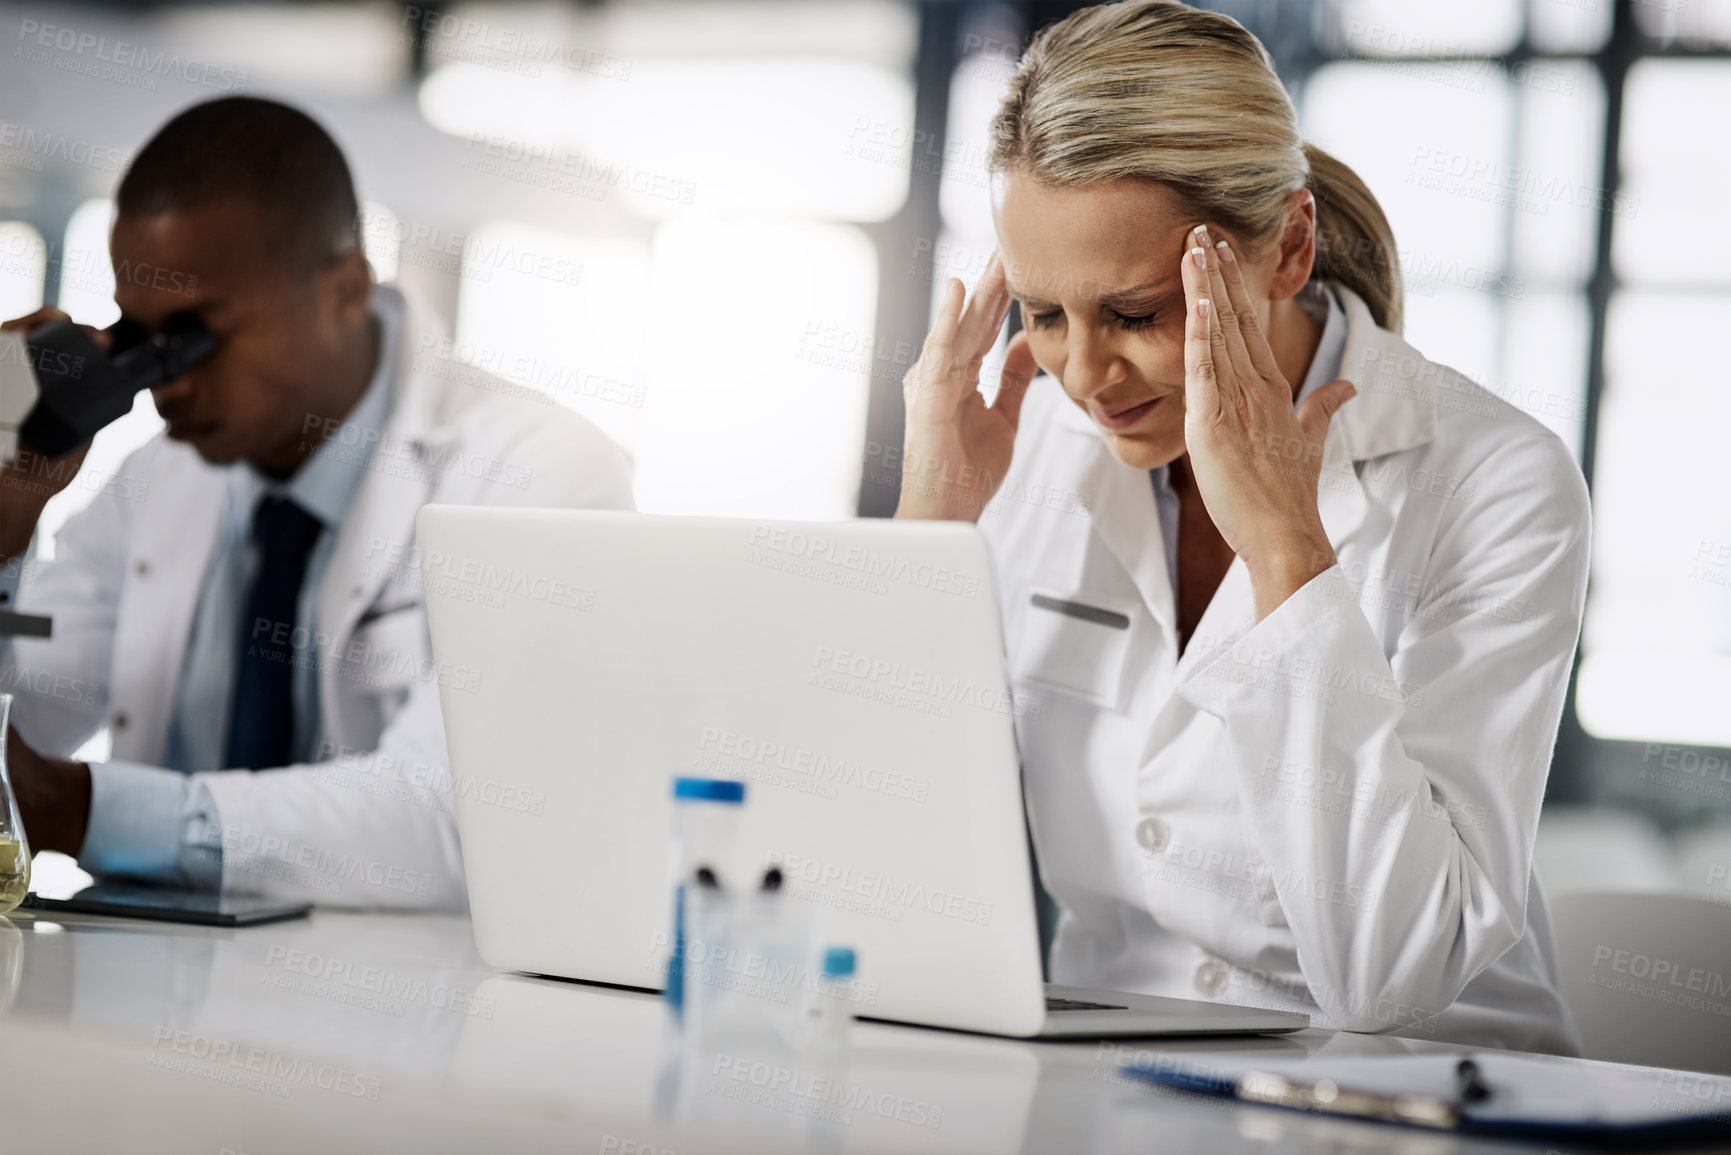 Buy stock photo Cropped shot of a mature female scientist suffering with a headache while working in her research lab